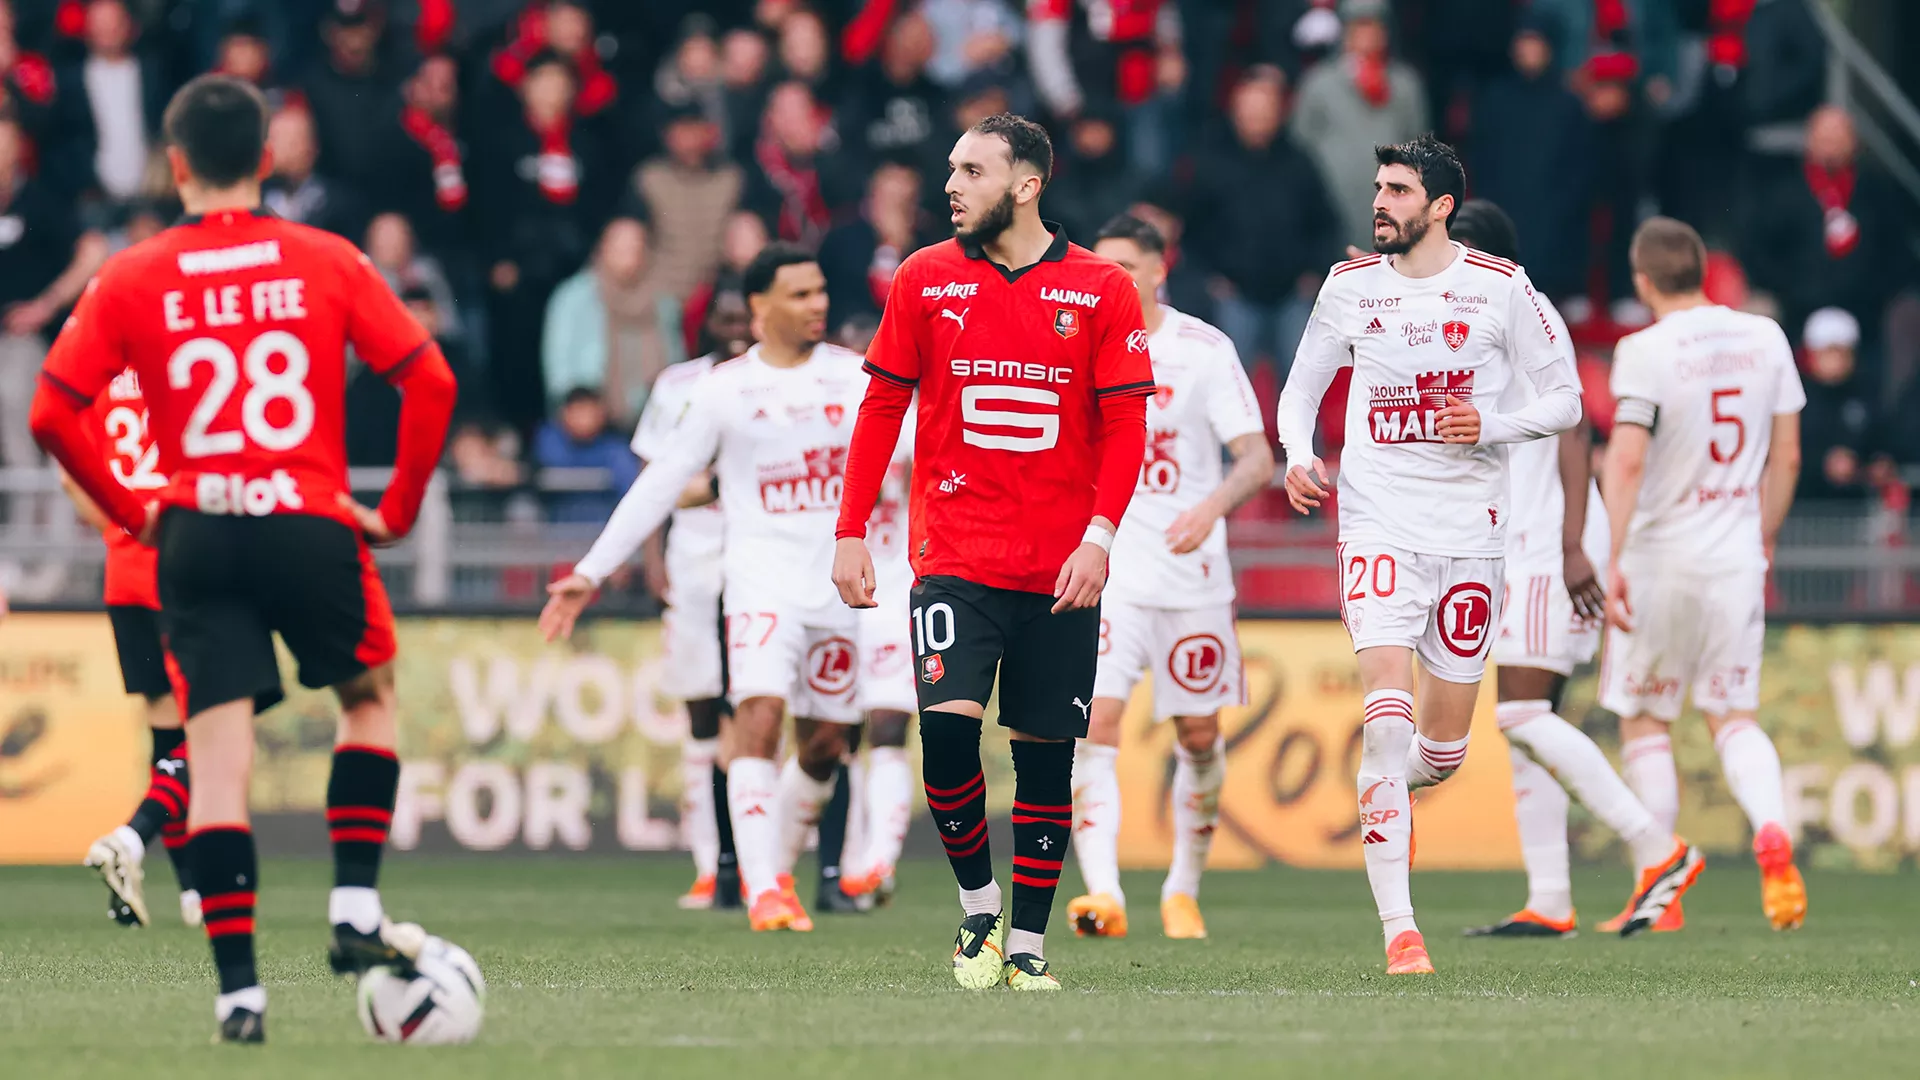 A disappointing end for Rennes (4-5)